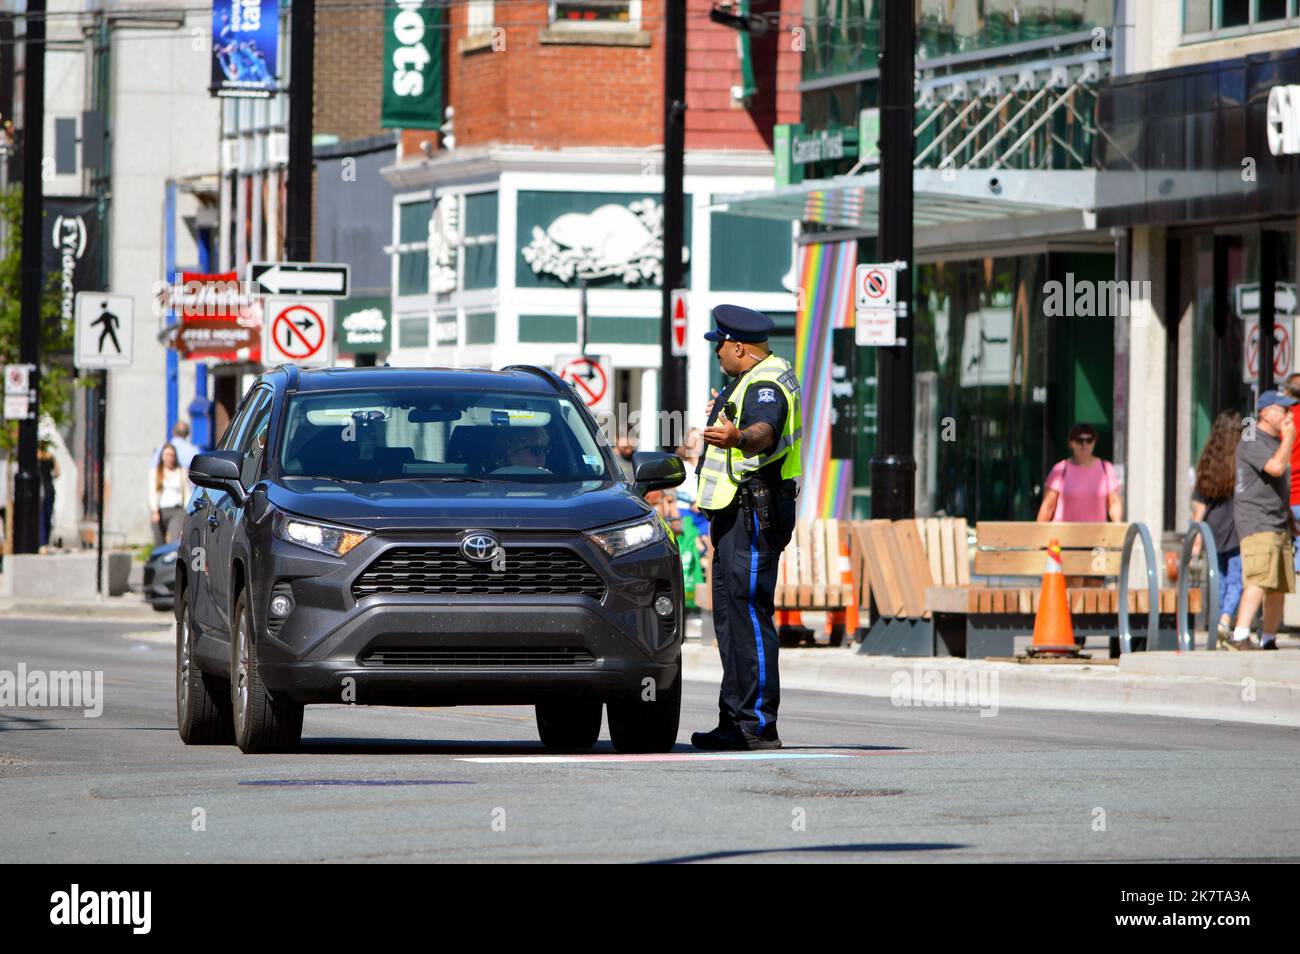 Halifax Regional Police officer on traffic control duty on the first day of the Spring Garden Road transit-only pilot scheme, 2022. Stock Photo